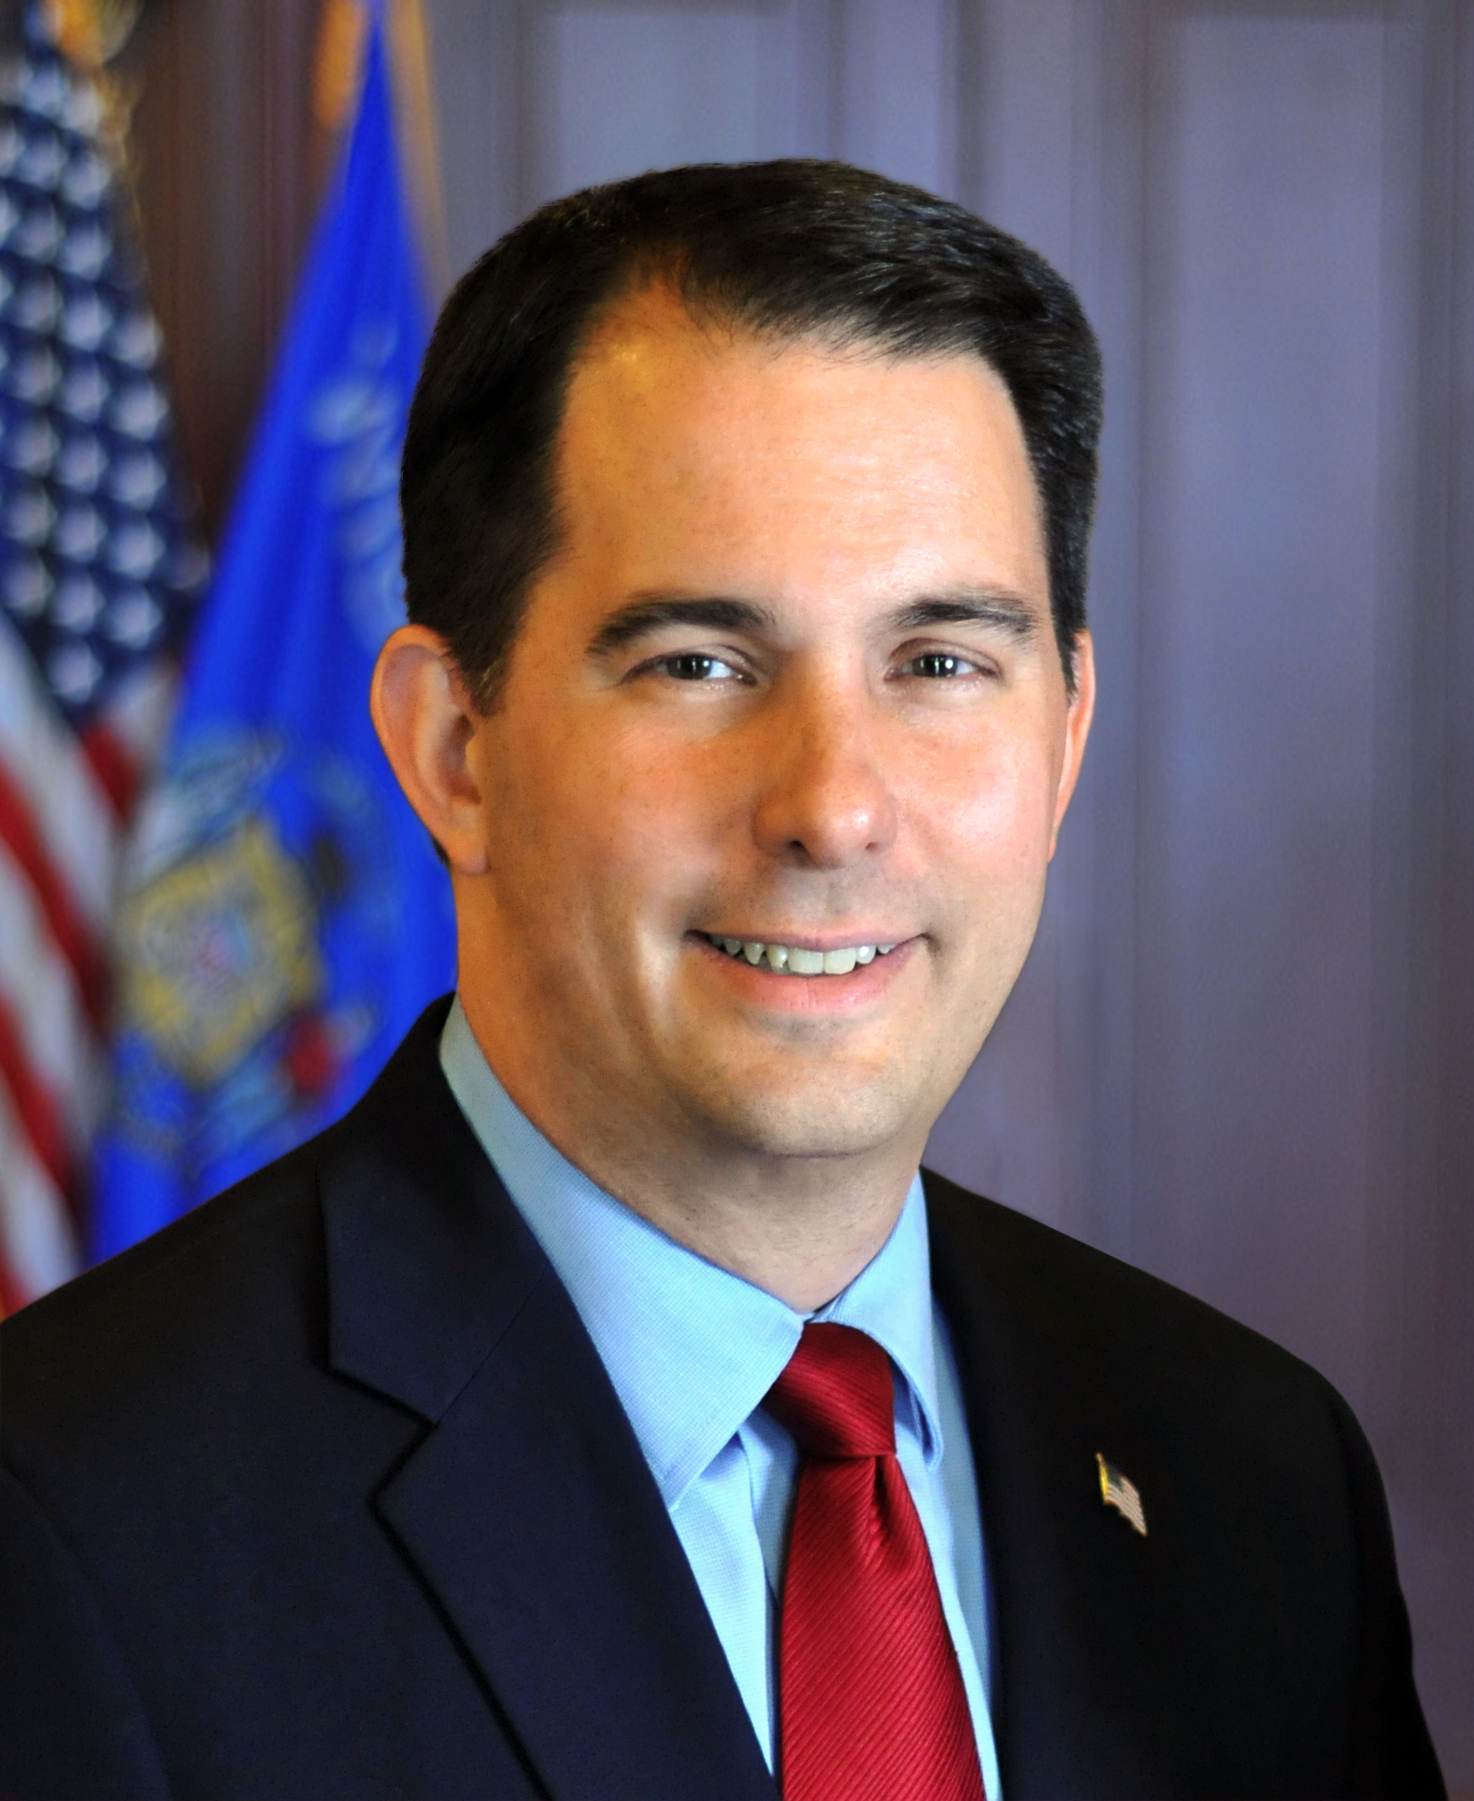 Governor Walker Attends Ashley Furniture Groundbreaking Ceremony in Arcadia